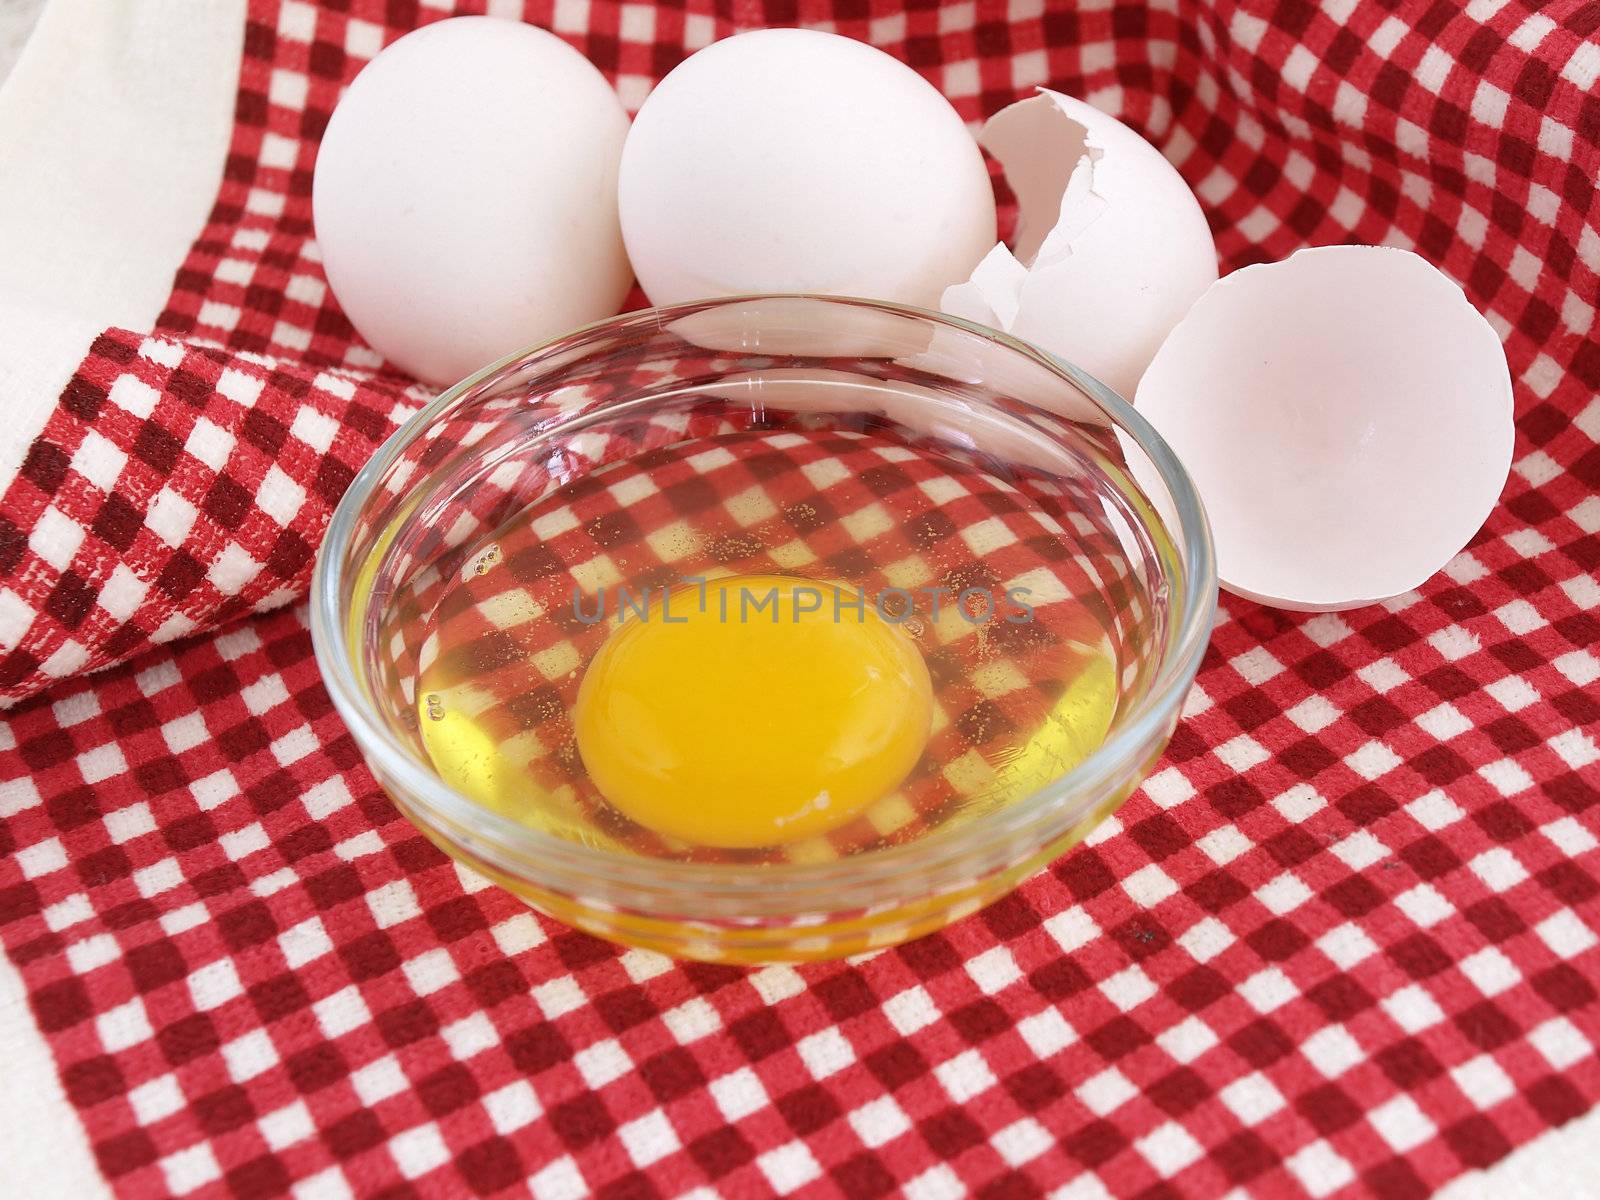 An egg cracked into a dish, eggshells and whole eggs laying on a red checkered background.